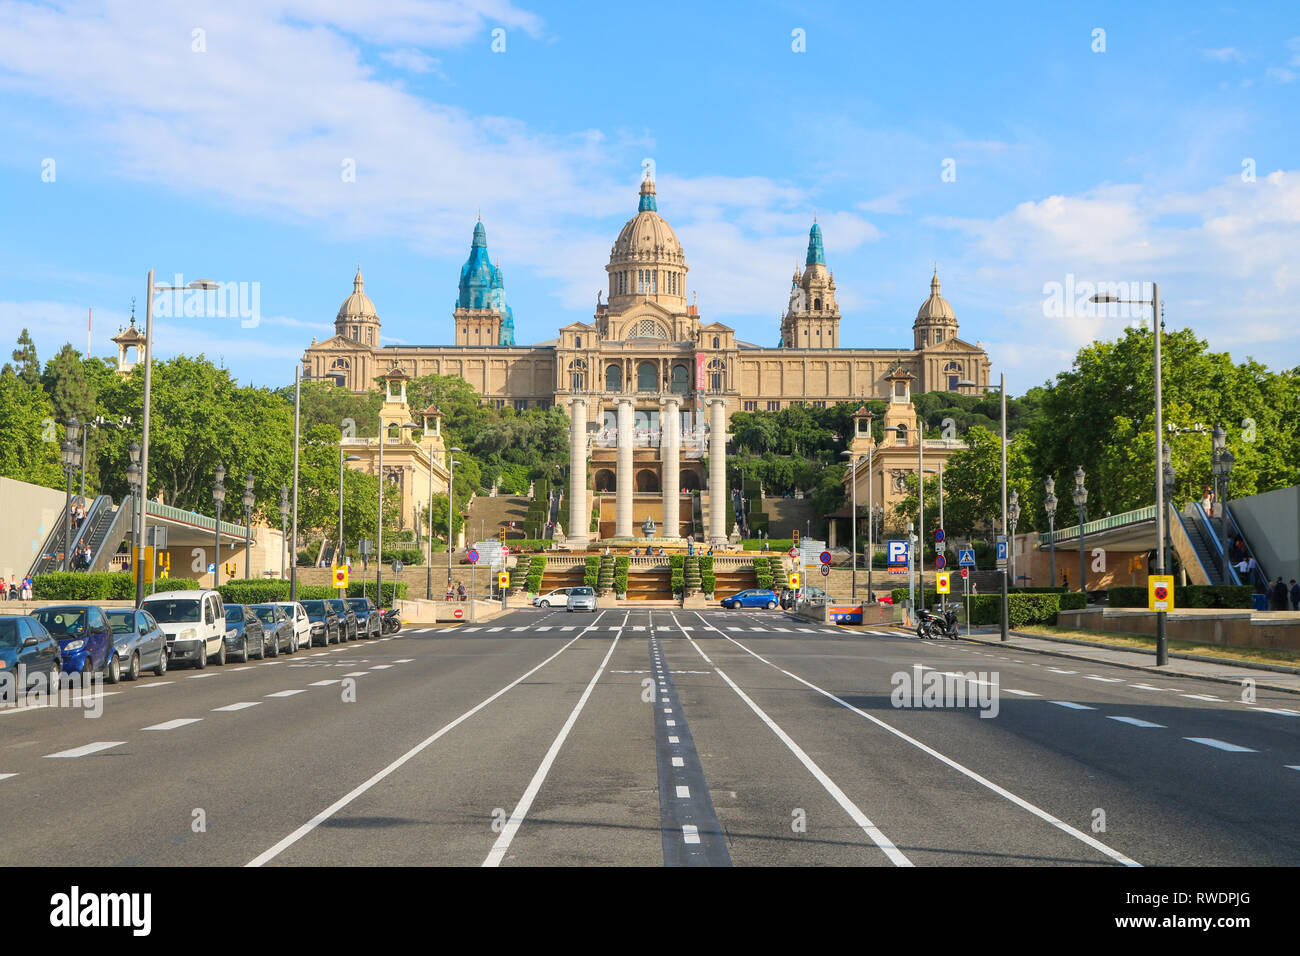 The Museu Nacional d'Art de Catalunya abbreviated as MNAC, is the national museum of Catalan visual art located in Barcelona, Catalonia, Spain. Stock Photo